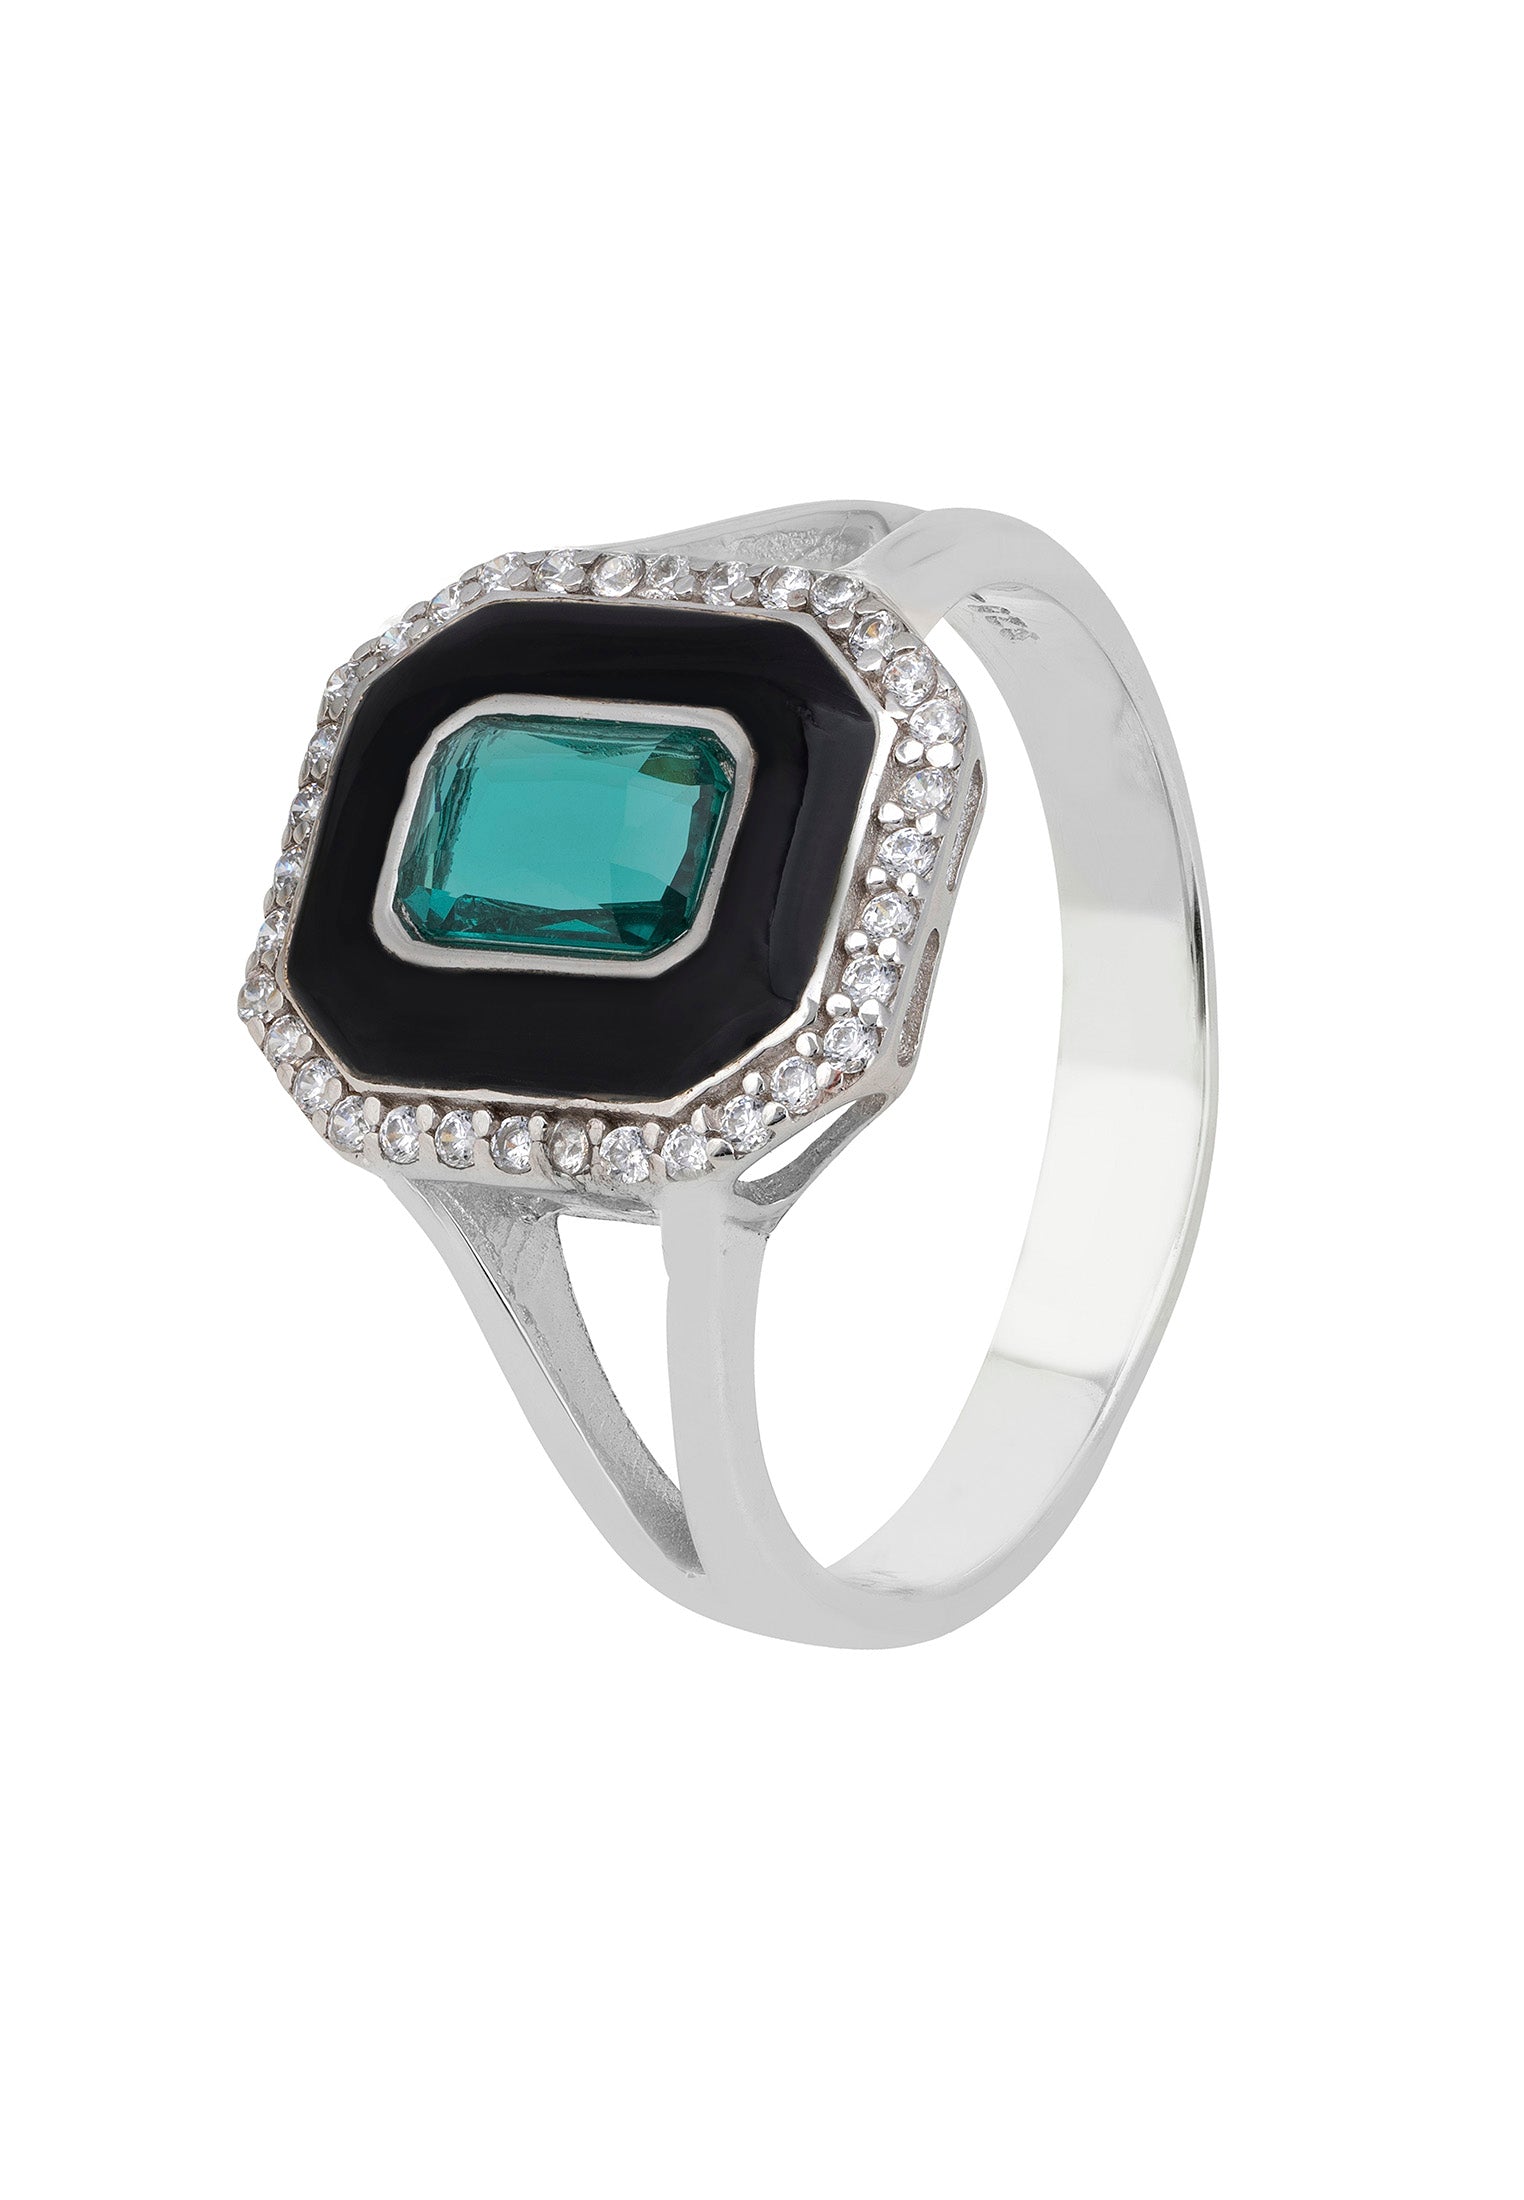 Art Deco Emerald And Enamel Cocktail Ring Silver